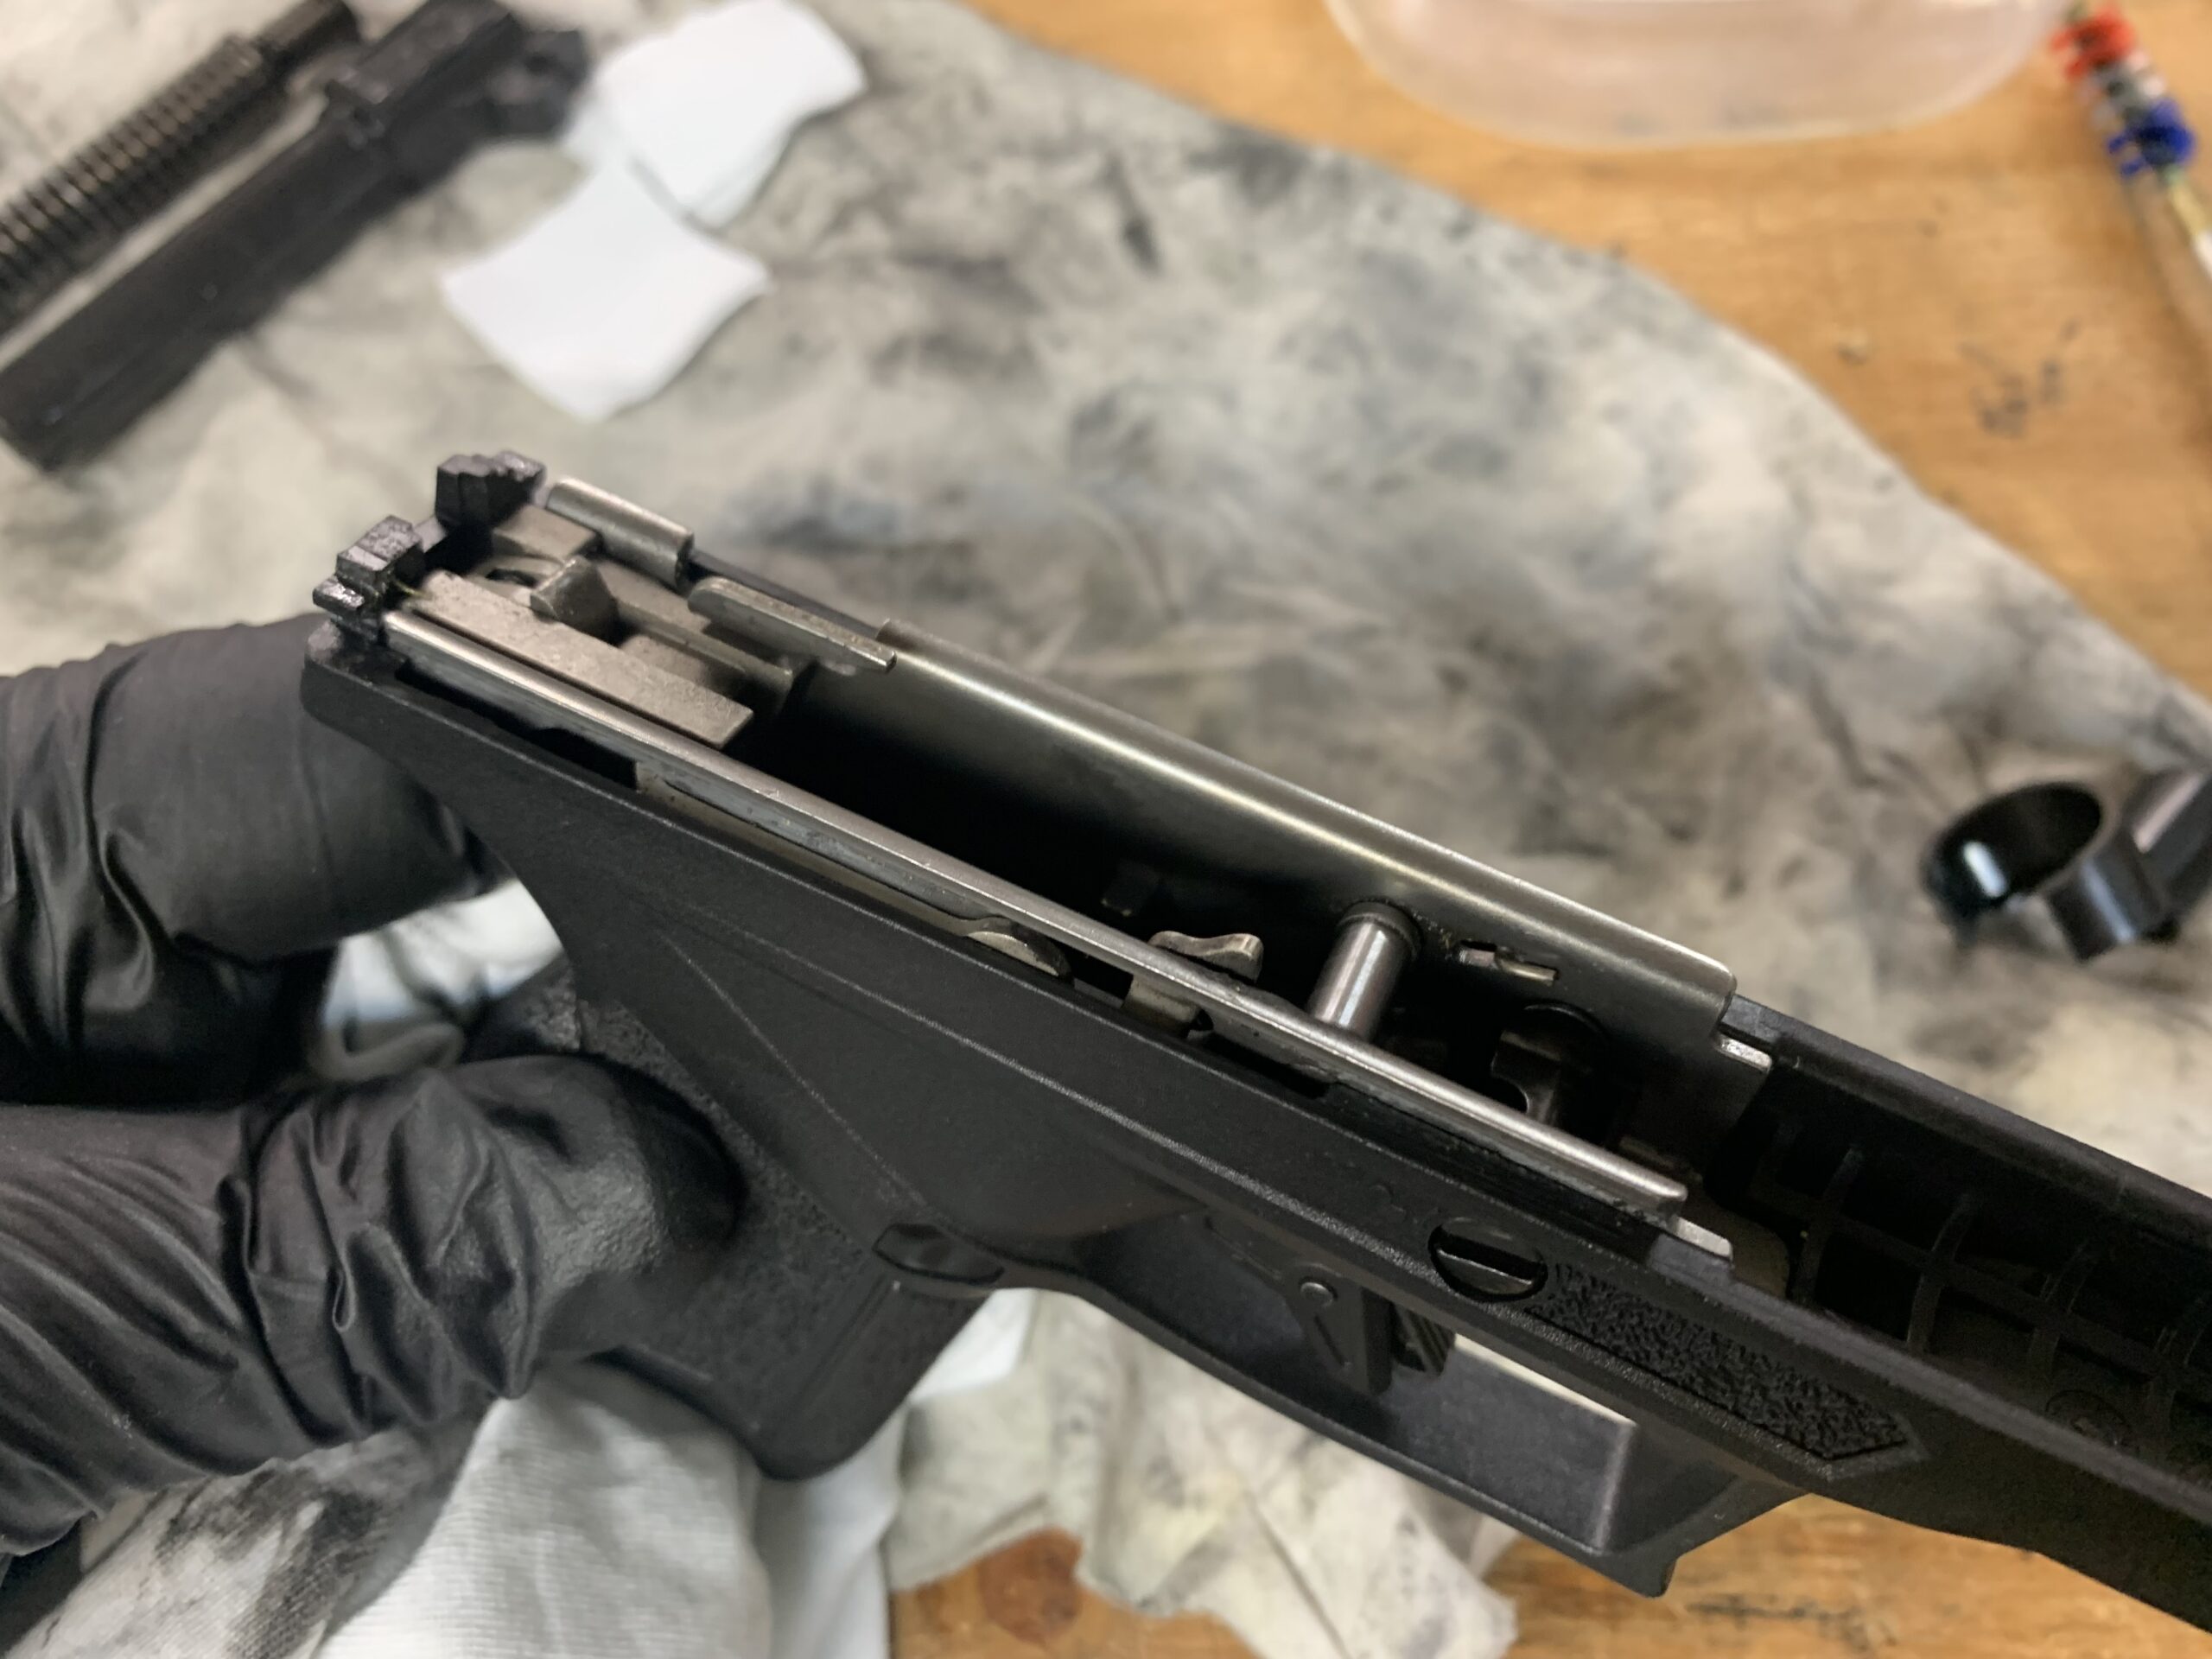 Cleaning a pistol's frame